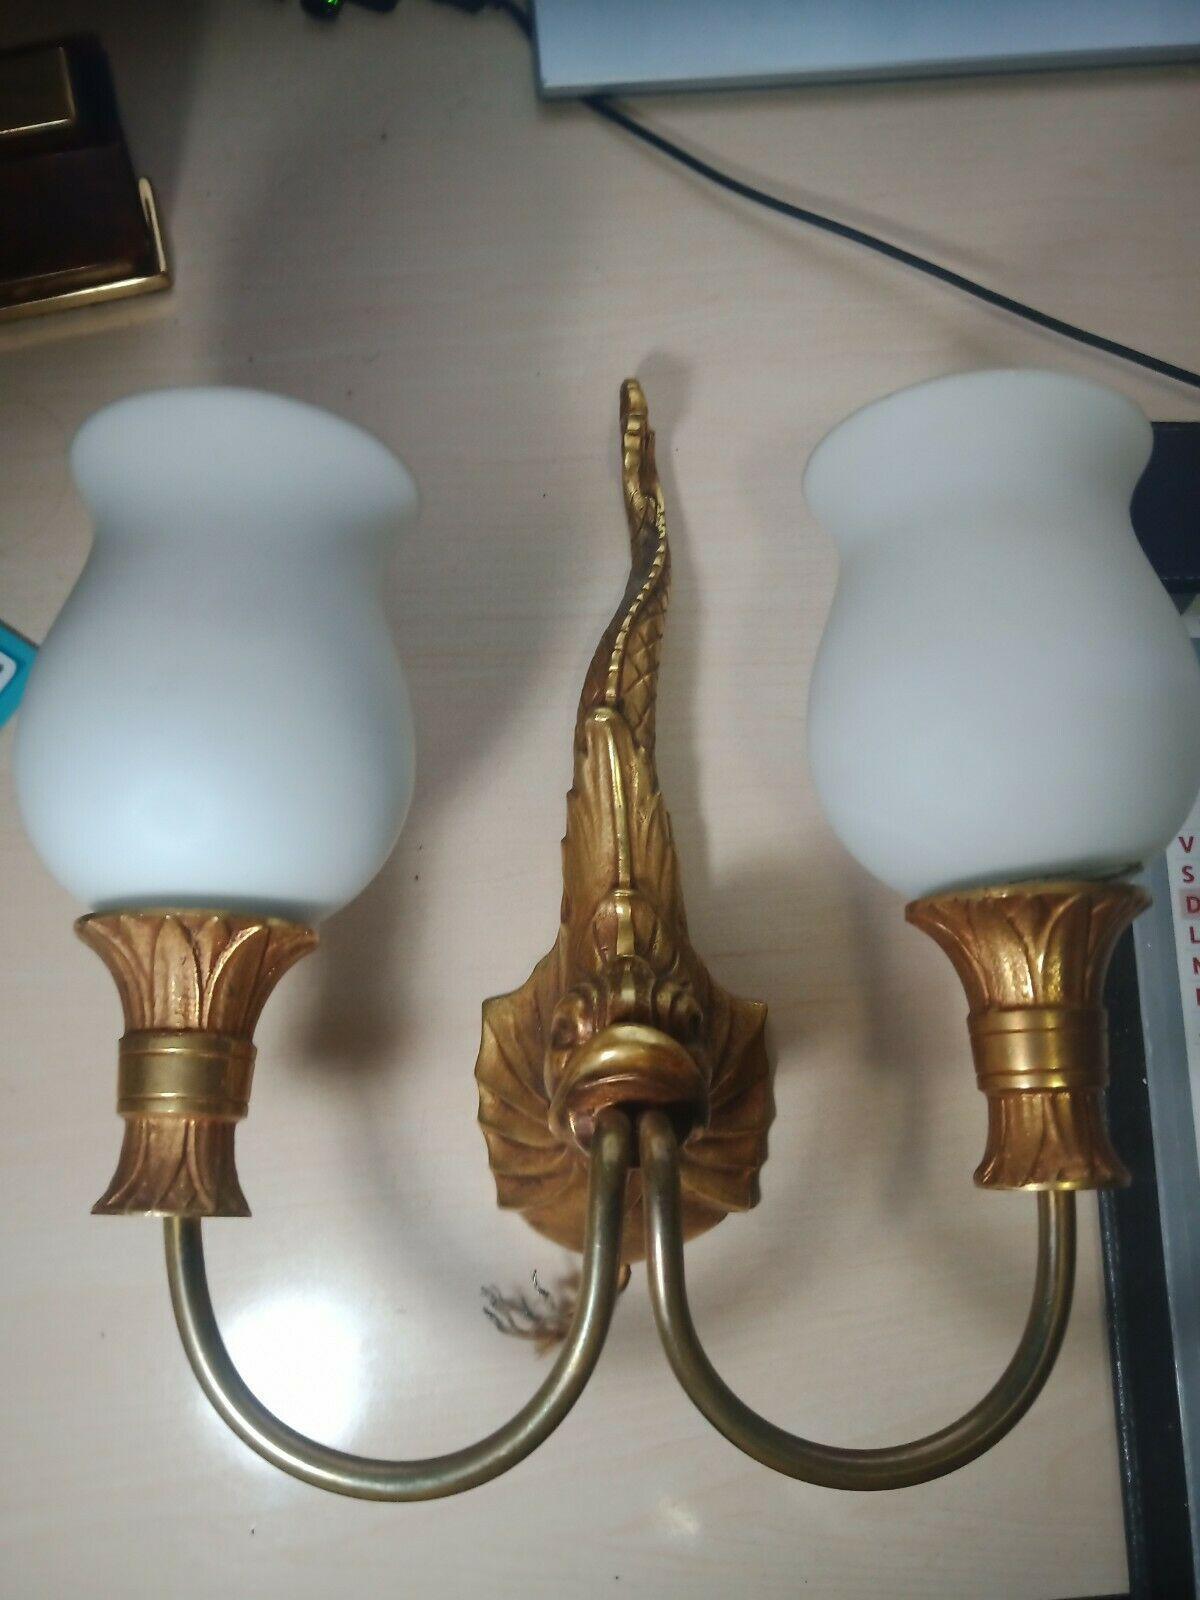 Mathed SET of 3. French Neoclassical style Gilt Bronze Dolphin/ Fish/ Sea Creature / Koi Wall Sconces with Original Opaline Glass Shades. I found these in the Montmarte section of Paris.